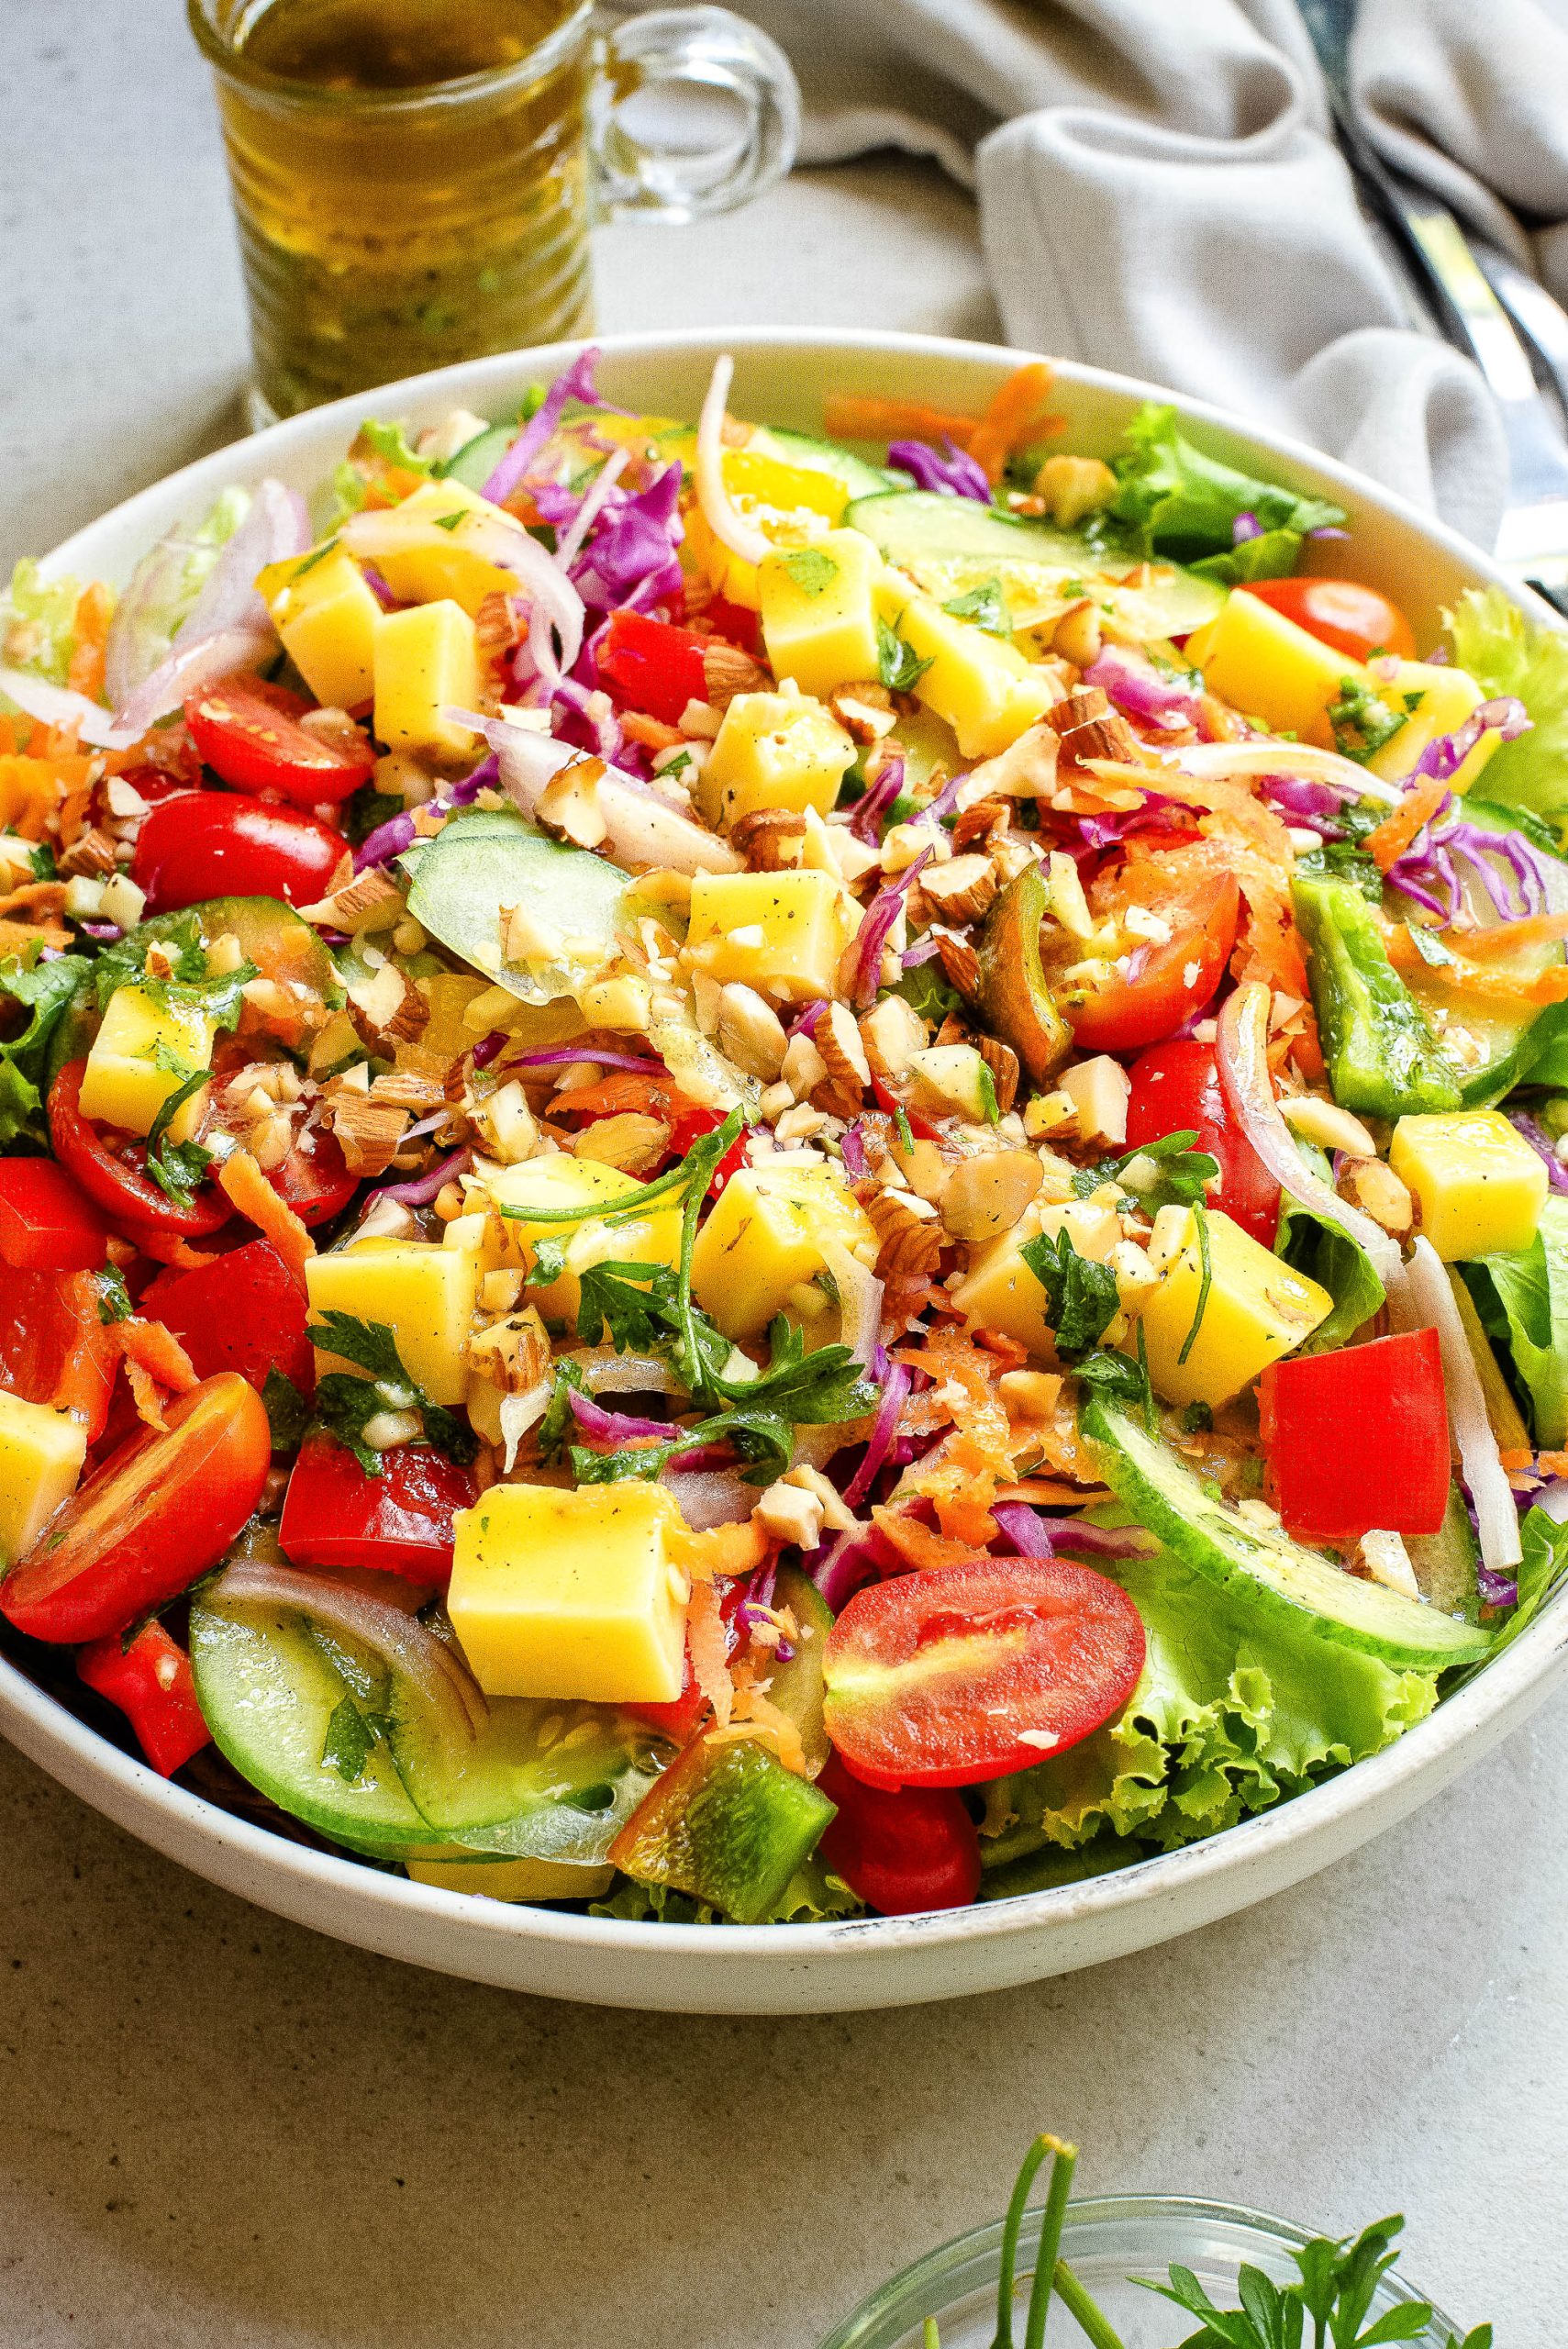 A colorful mixed vegetable salad in a white bowl, featuring diced mango, cherry tomatoes, bell peppers, cucumber slices, red cabbage, and greens, with a jug of dressing in the background.